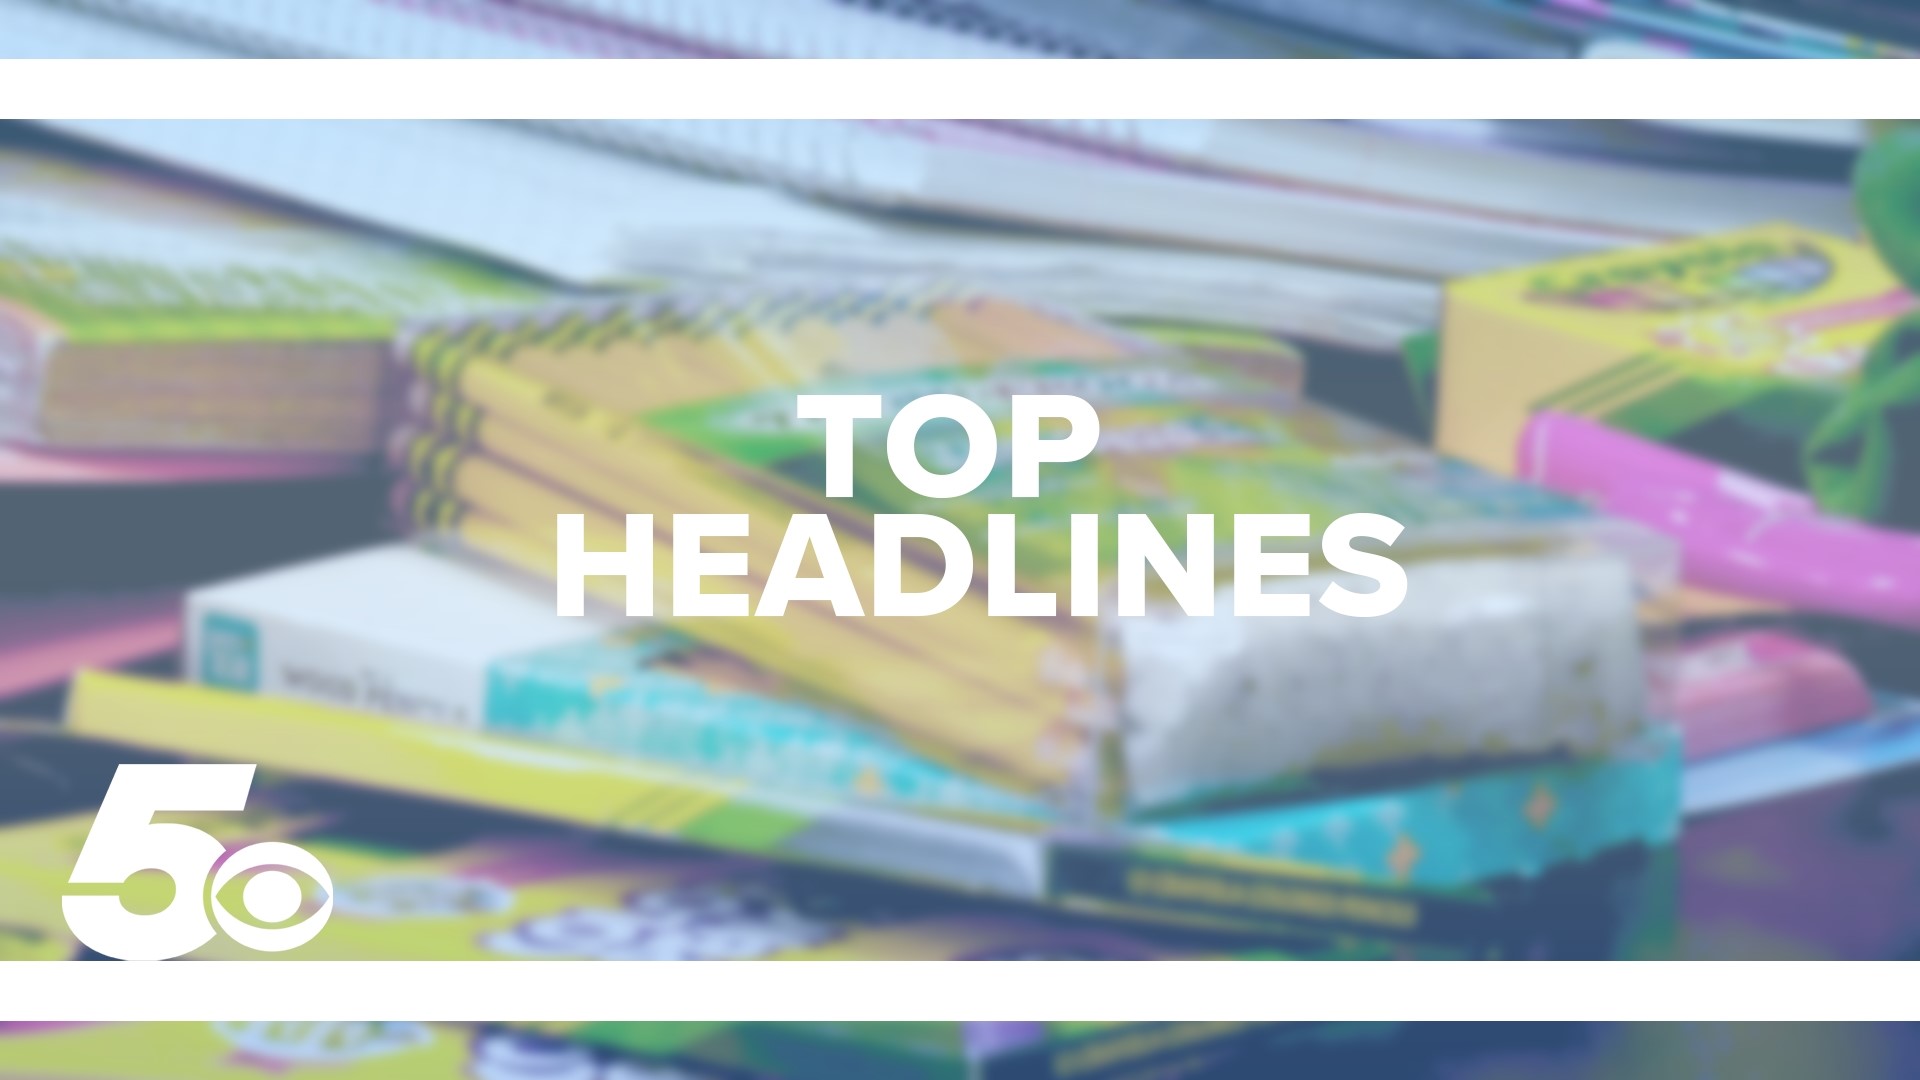 Check out today's top headlines, including weather, rising school insurance costs, continuing strikes in Hollywood, and more.